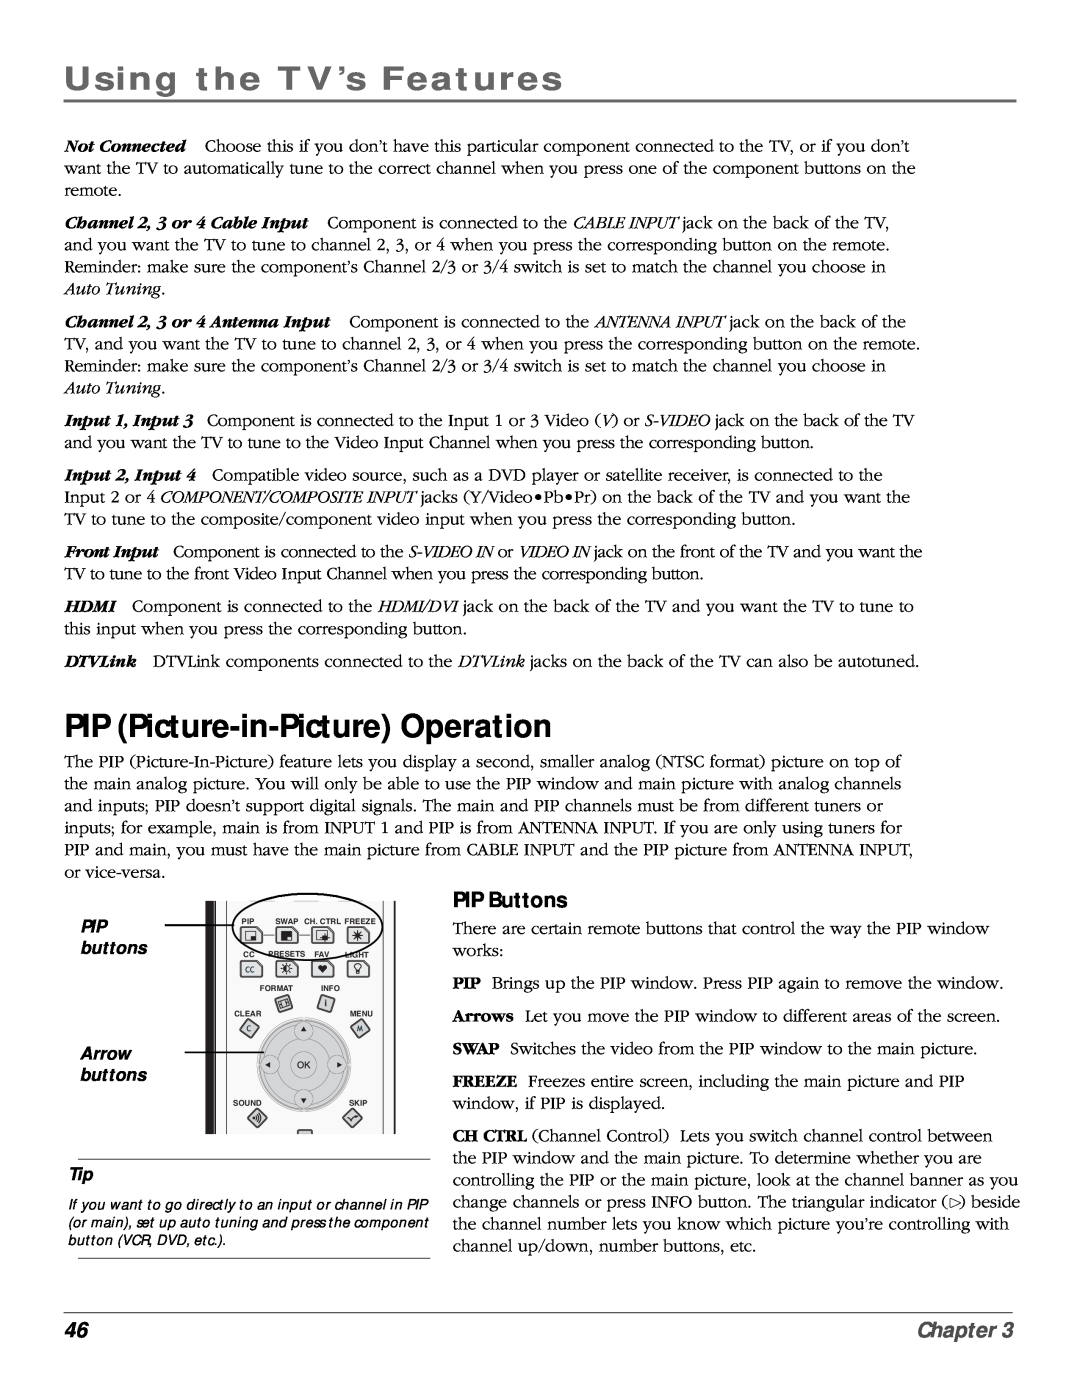 RCA scenium manual PIP Picture-in-Picture Operation, PIP Buttons, buttons, Arrow, Using the TV’s Features, Chapter 